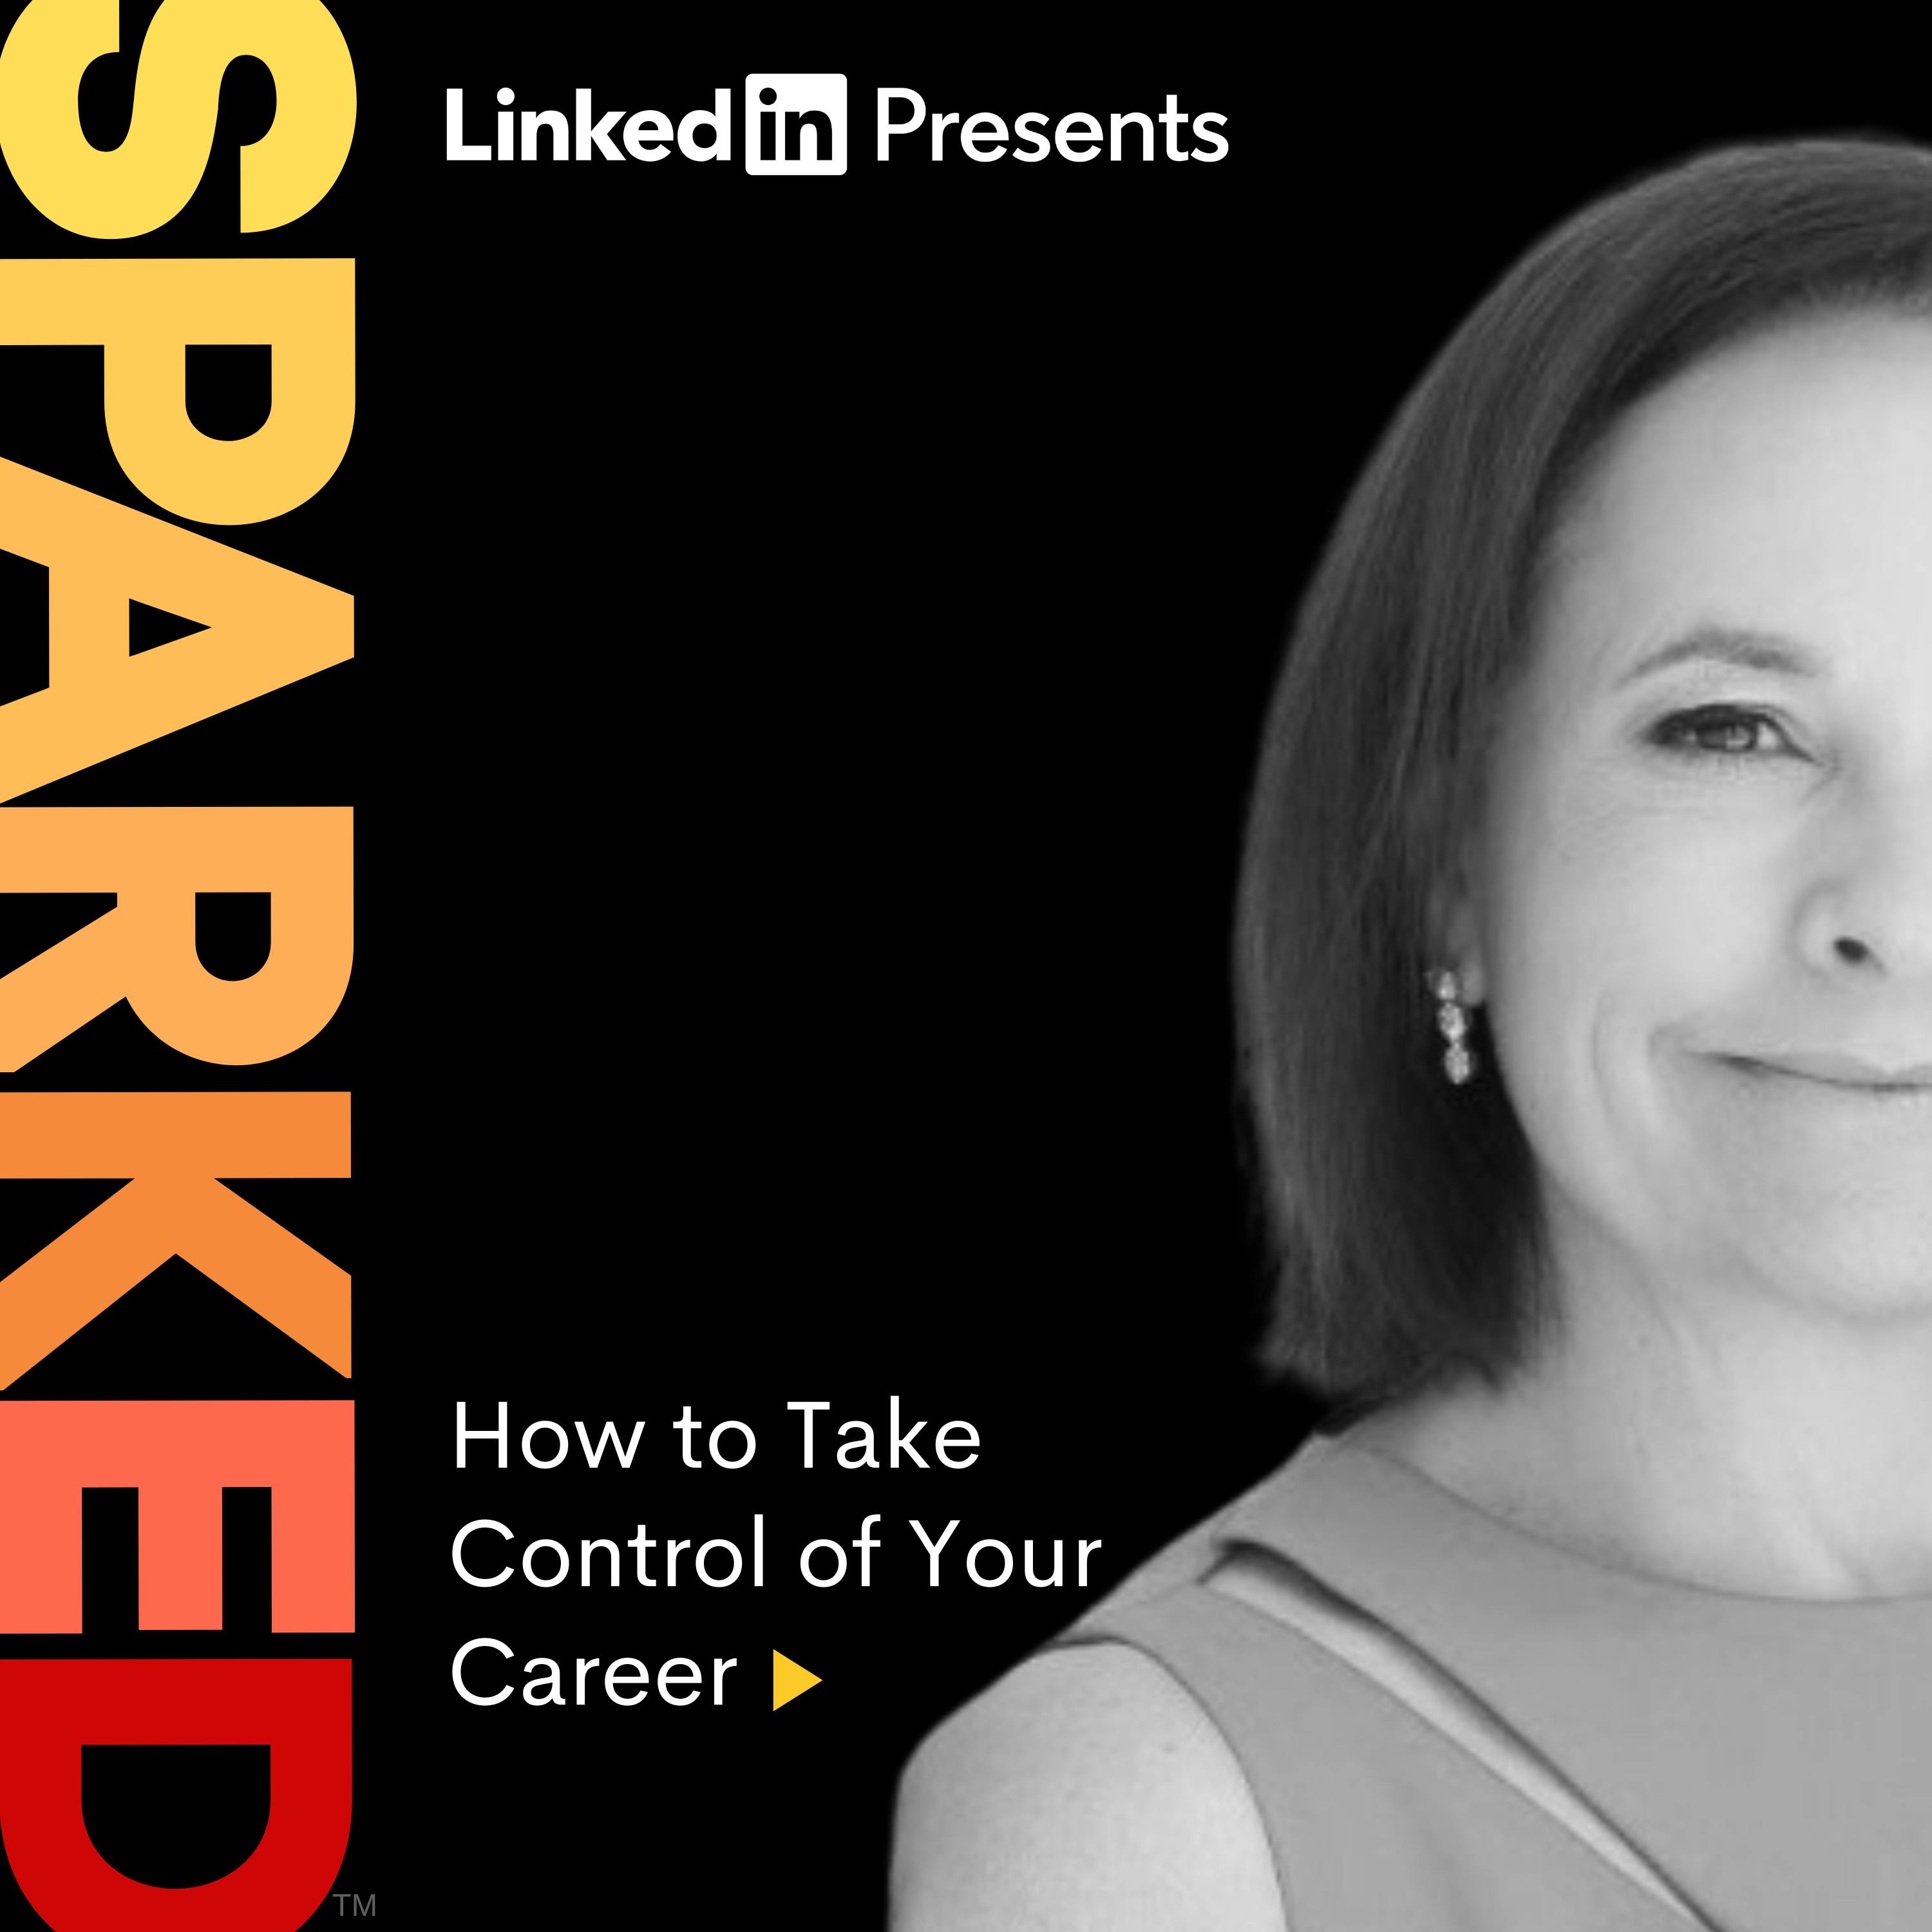 How to Take Control of Your Career